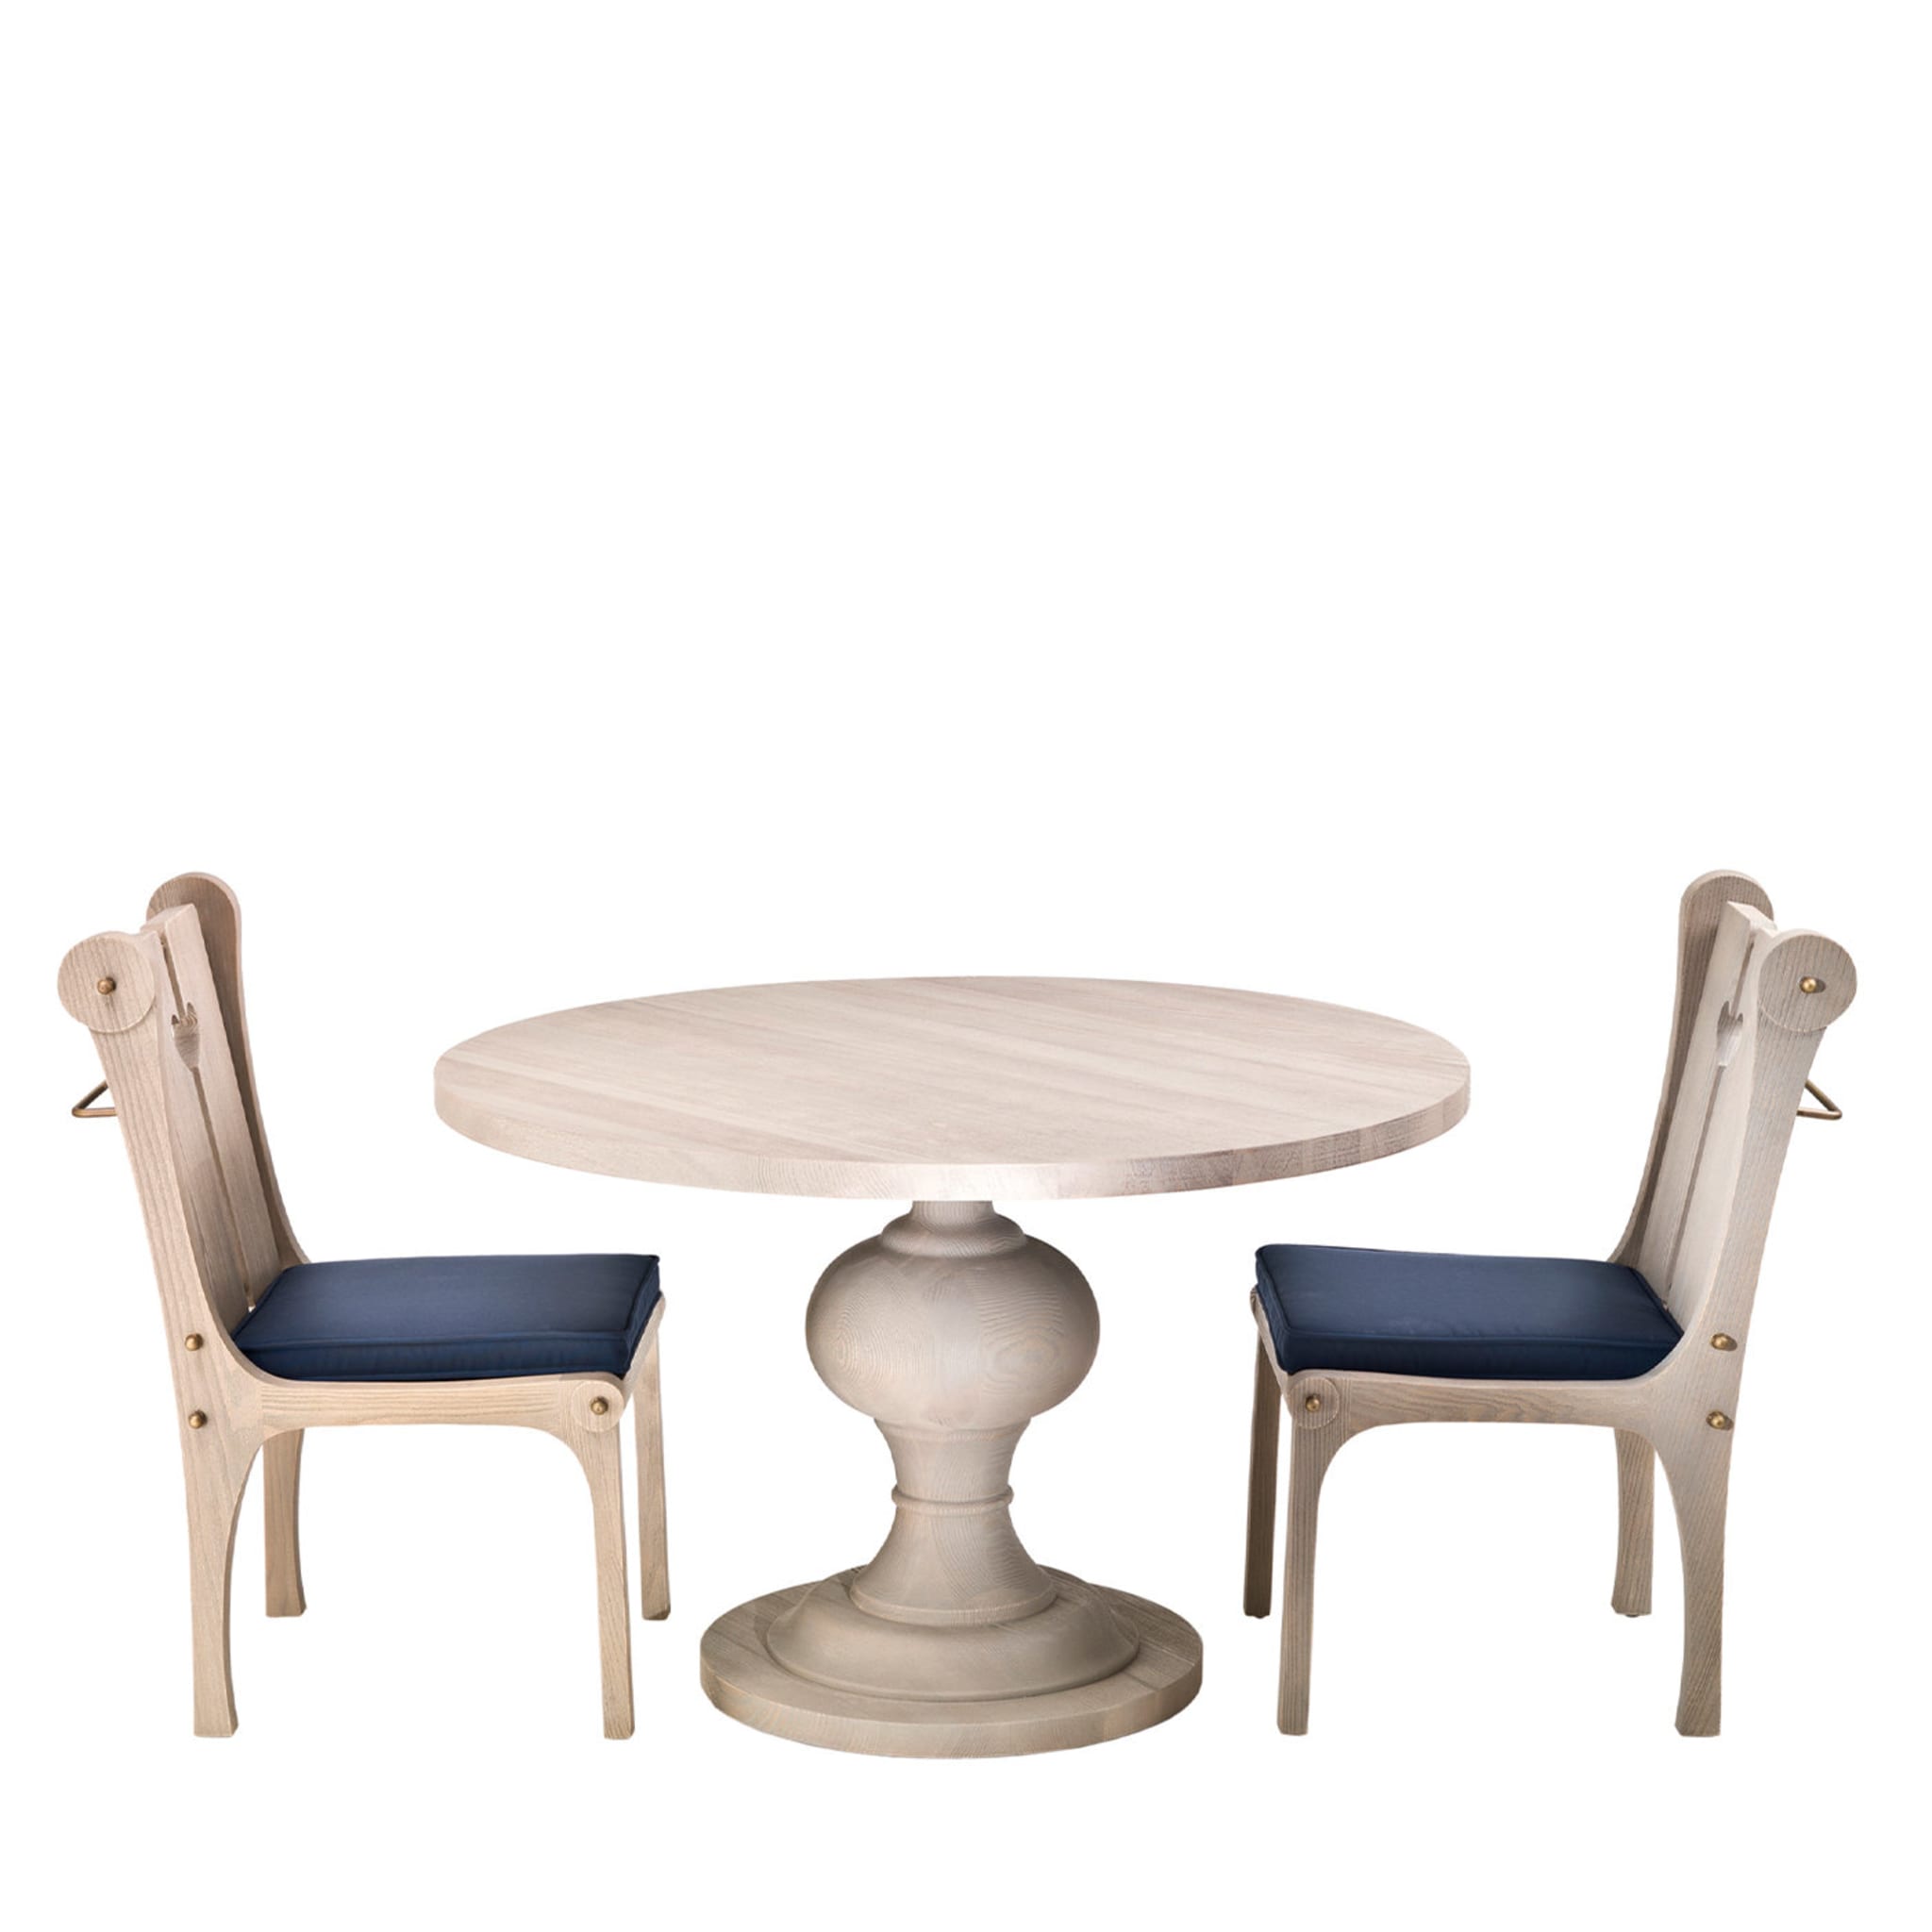 Ferne Round Outdoor Dining Table by Archer Humphryes Architects - Alternative view 1